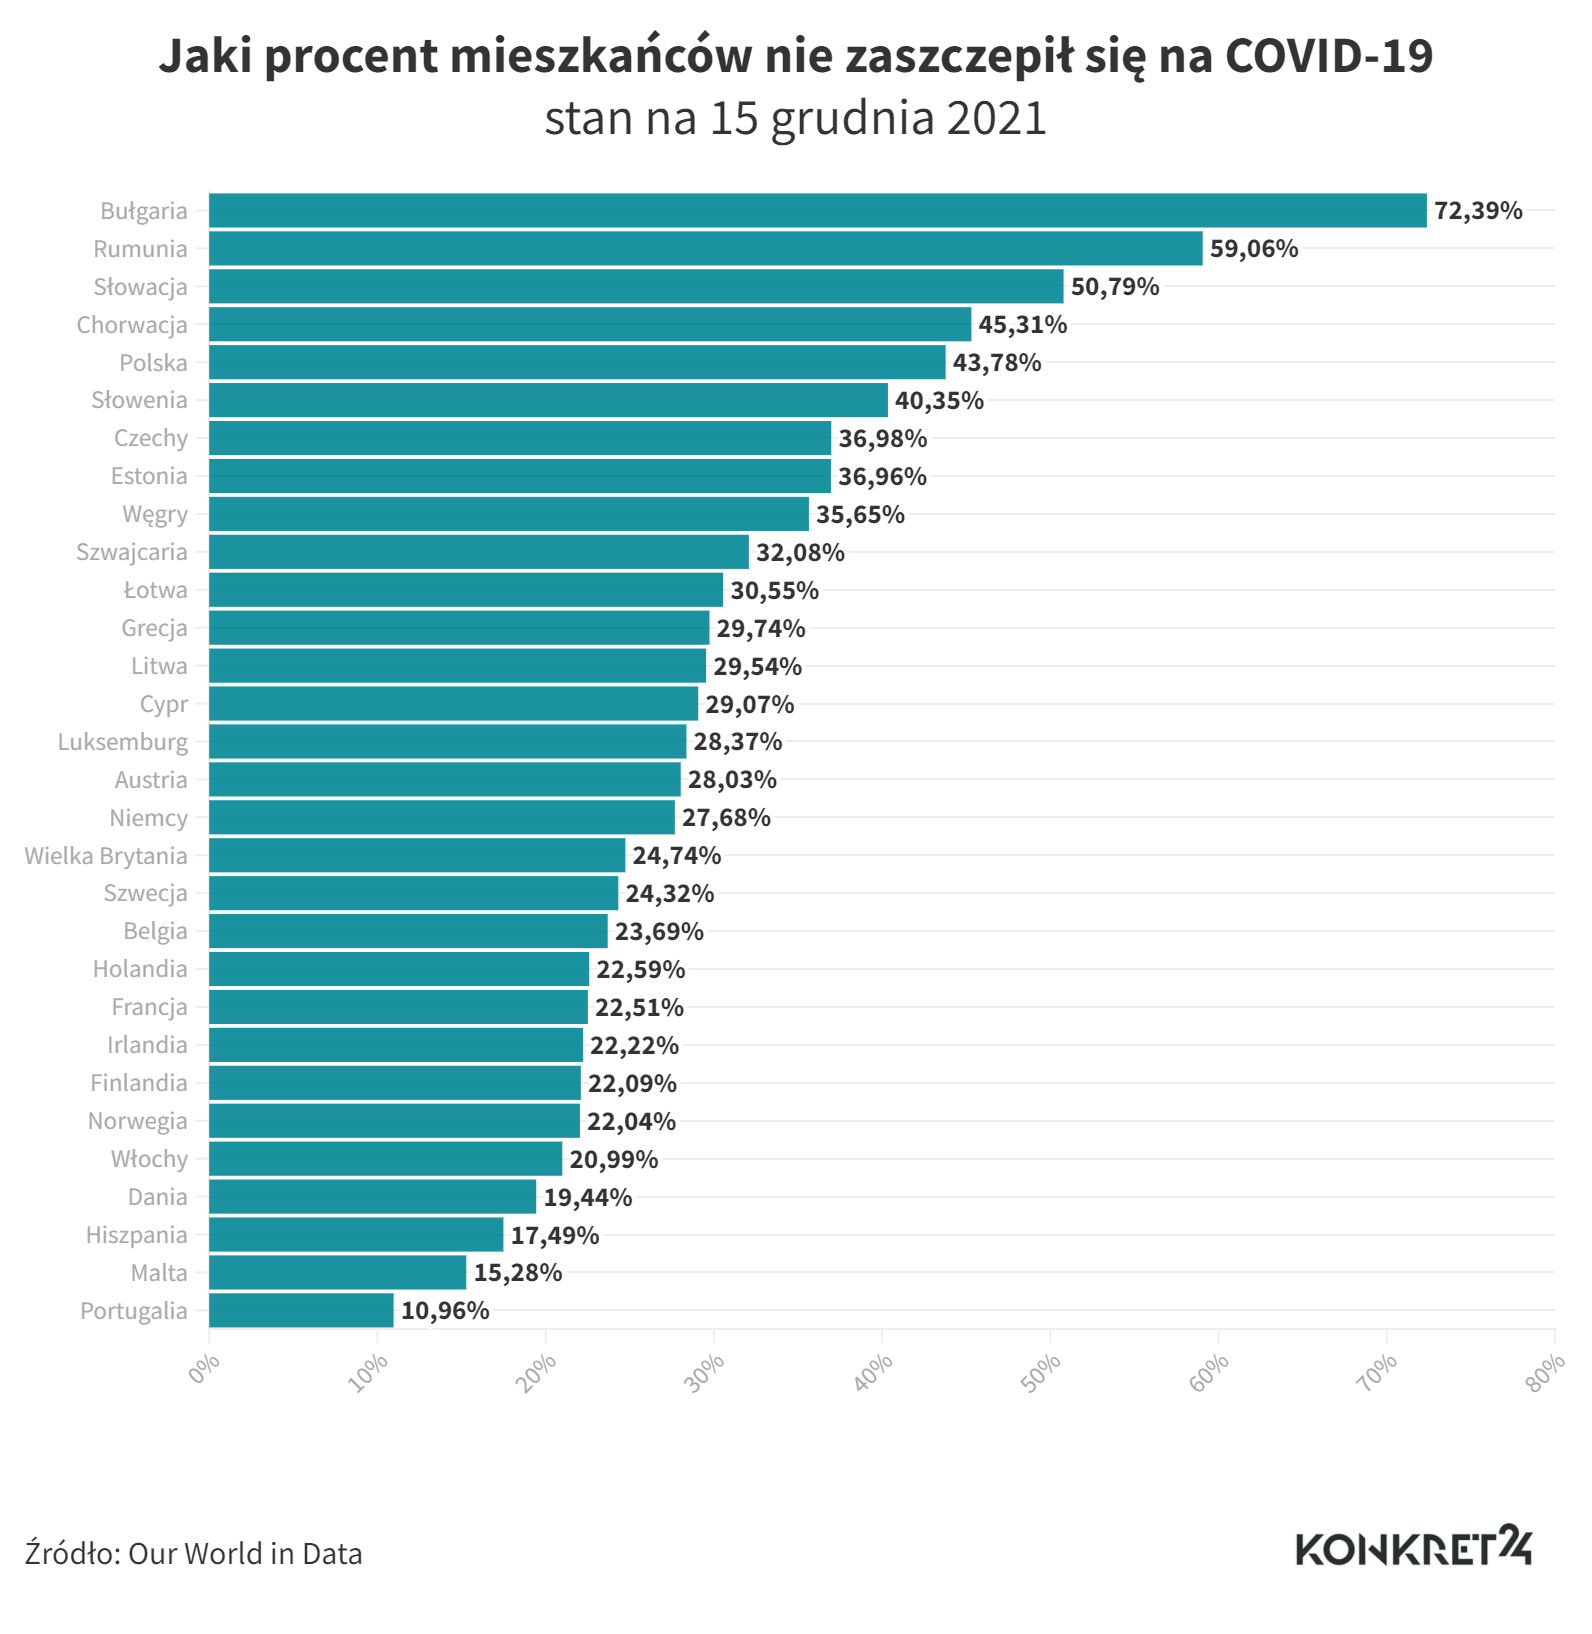 What percentage of the population has not been vaccinated against COVID-19 - as of December 15, 2021